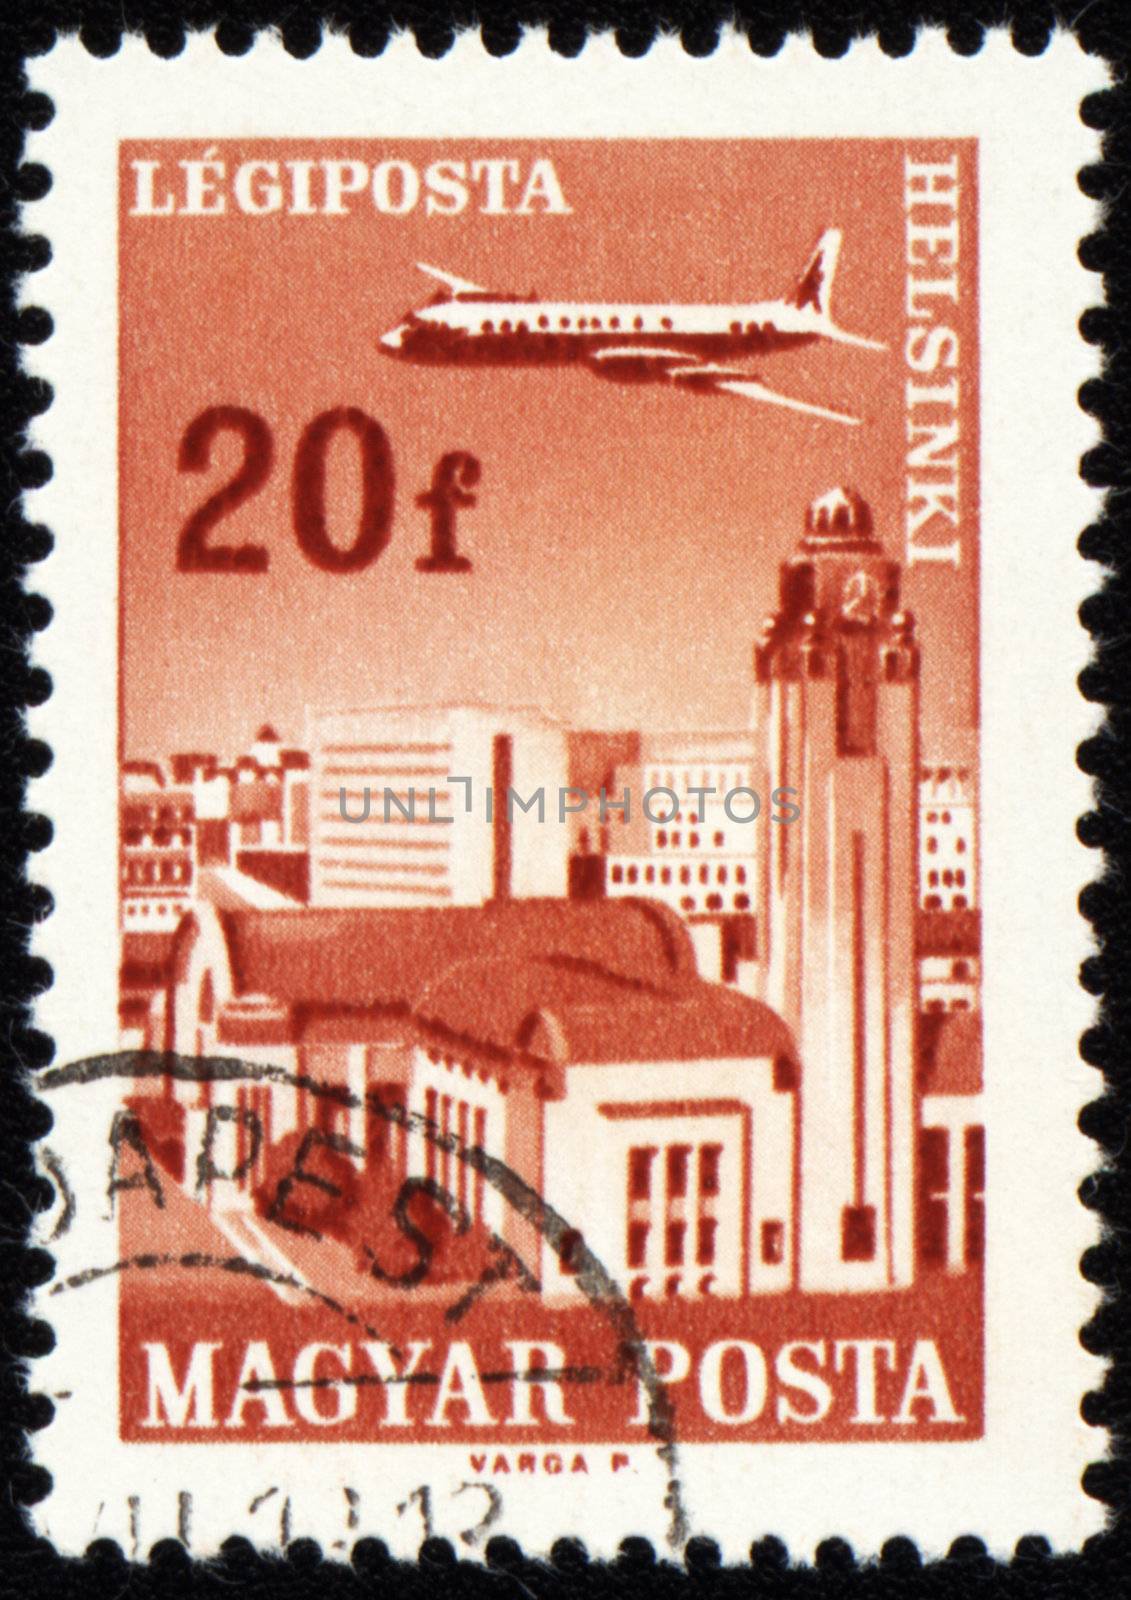 HUNGARY - CIRCA 1966: A stamp printed in Hungary shows flying plane over the Helsinki, series, circa 1966